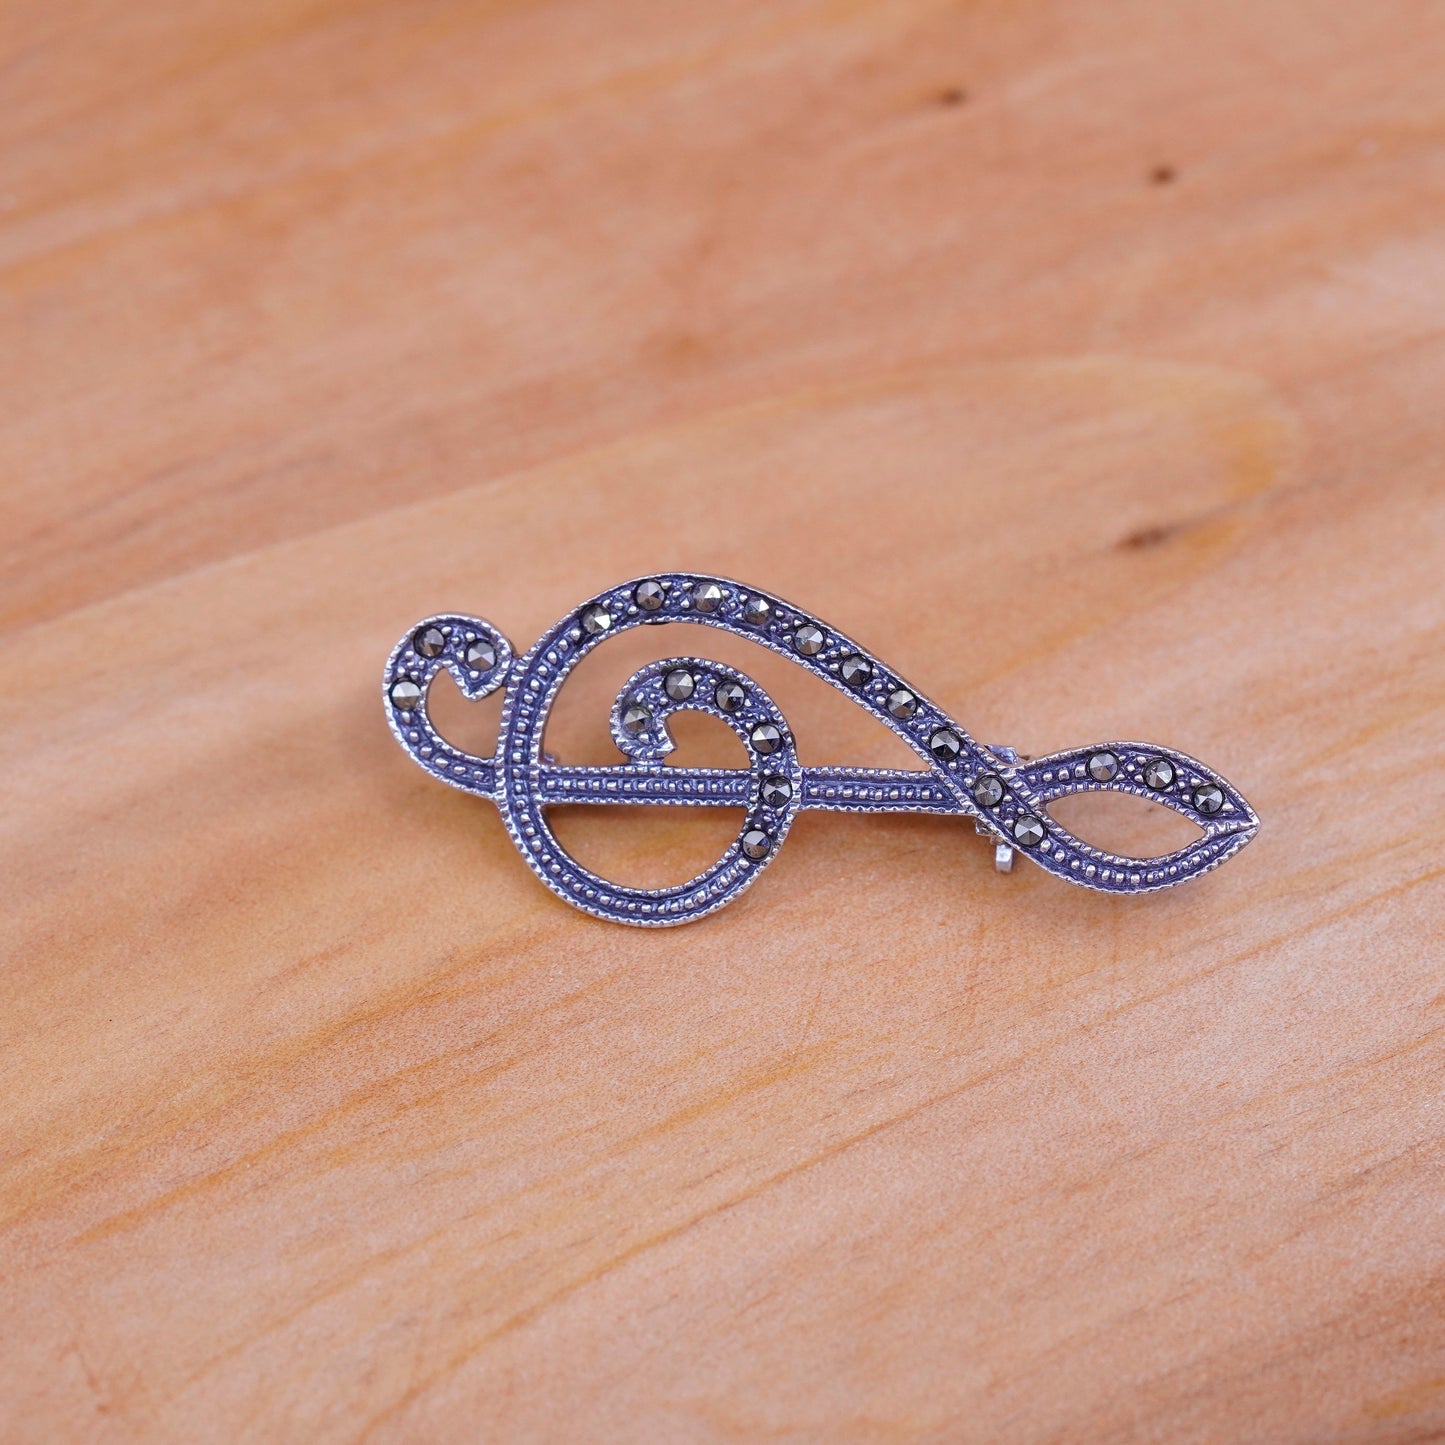 Vintage handmade sterling 925 silver music note symbol brooch with Marcasite